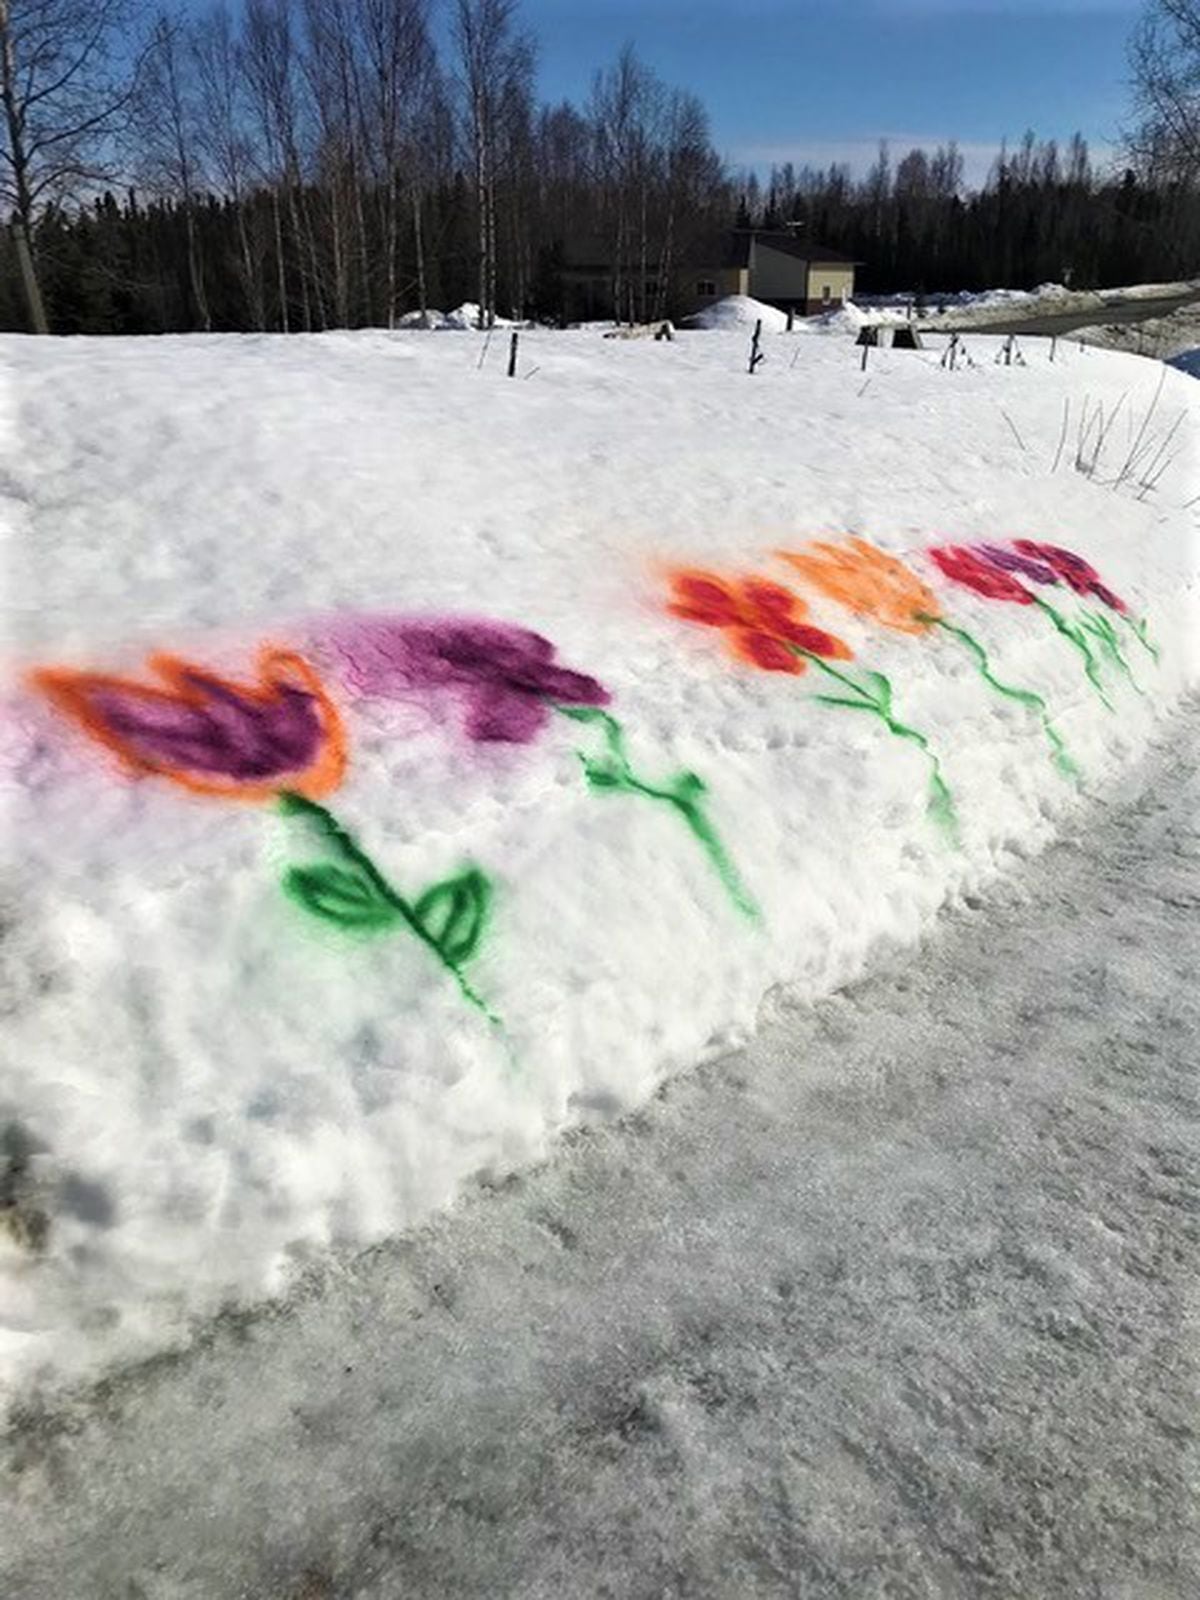 A snow berm in Soldotna is spray-painted with flowers. A sister and brother team, ages 9 and 11, wanted to bring some joy to people during the pandemic. (Kathleen Tarr photo)